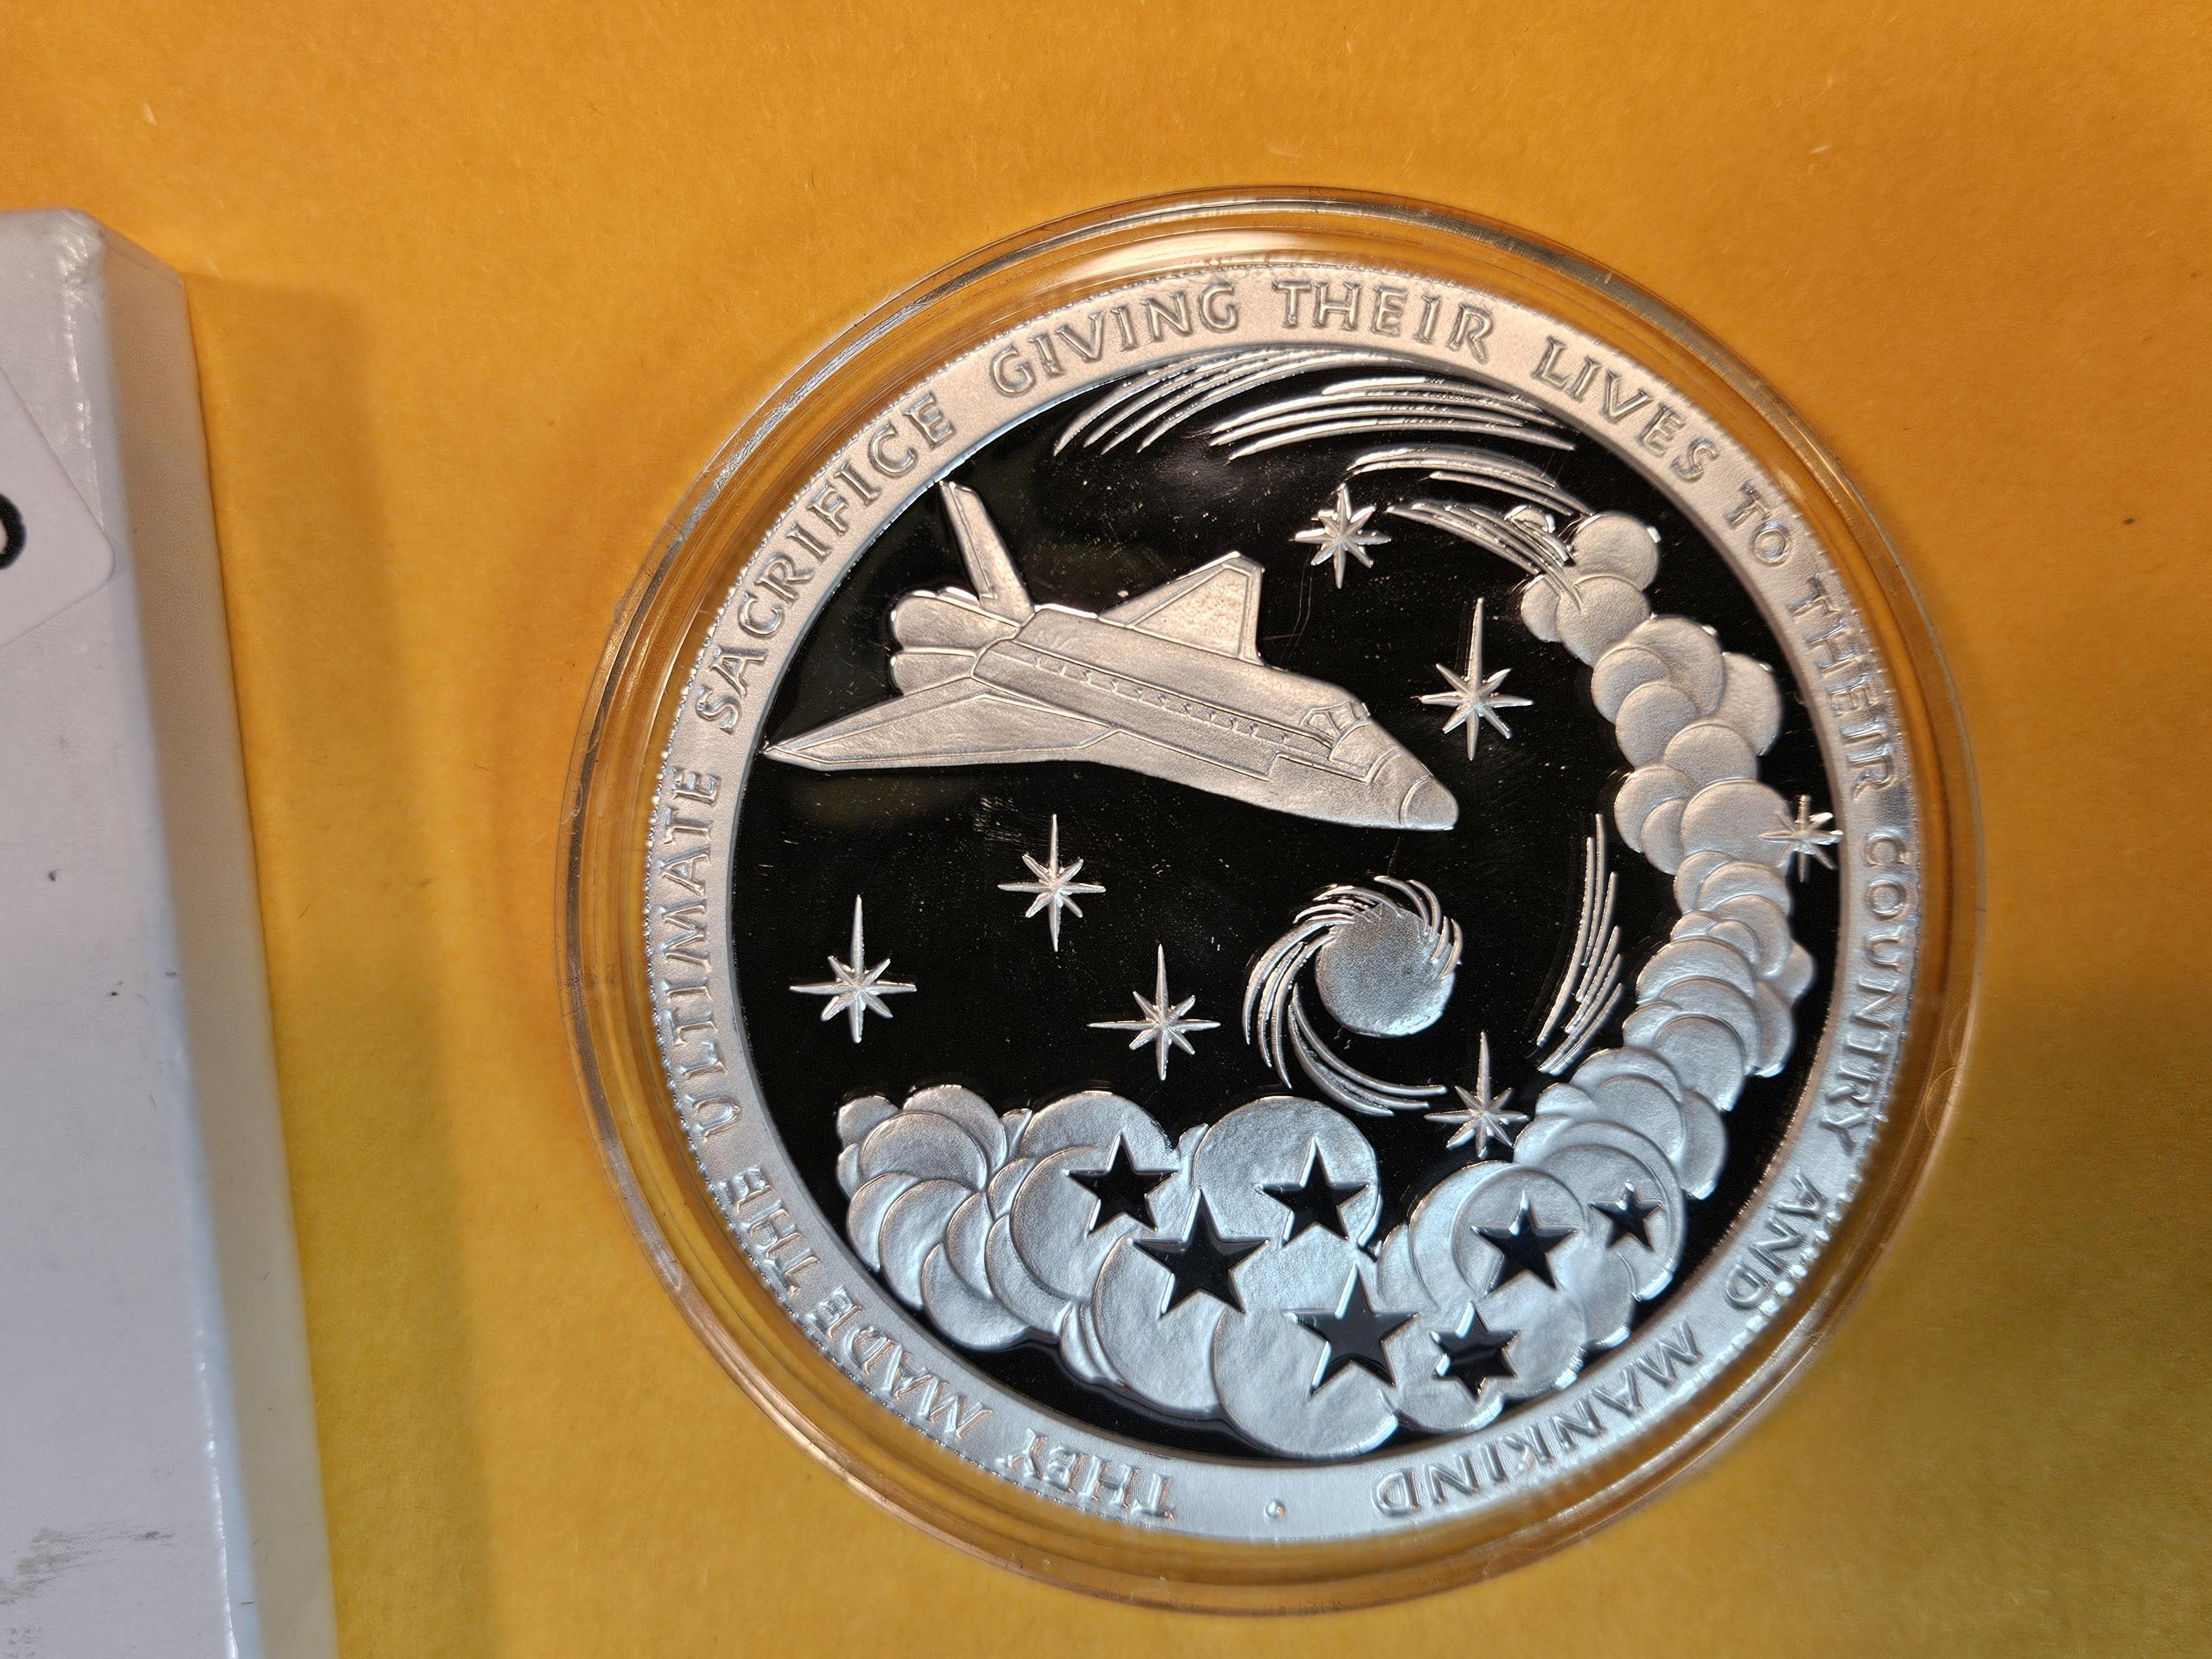 FIVE ounce high-relief .999 fine Silver Proof Art Round